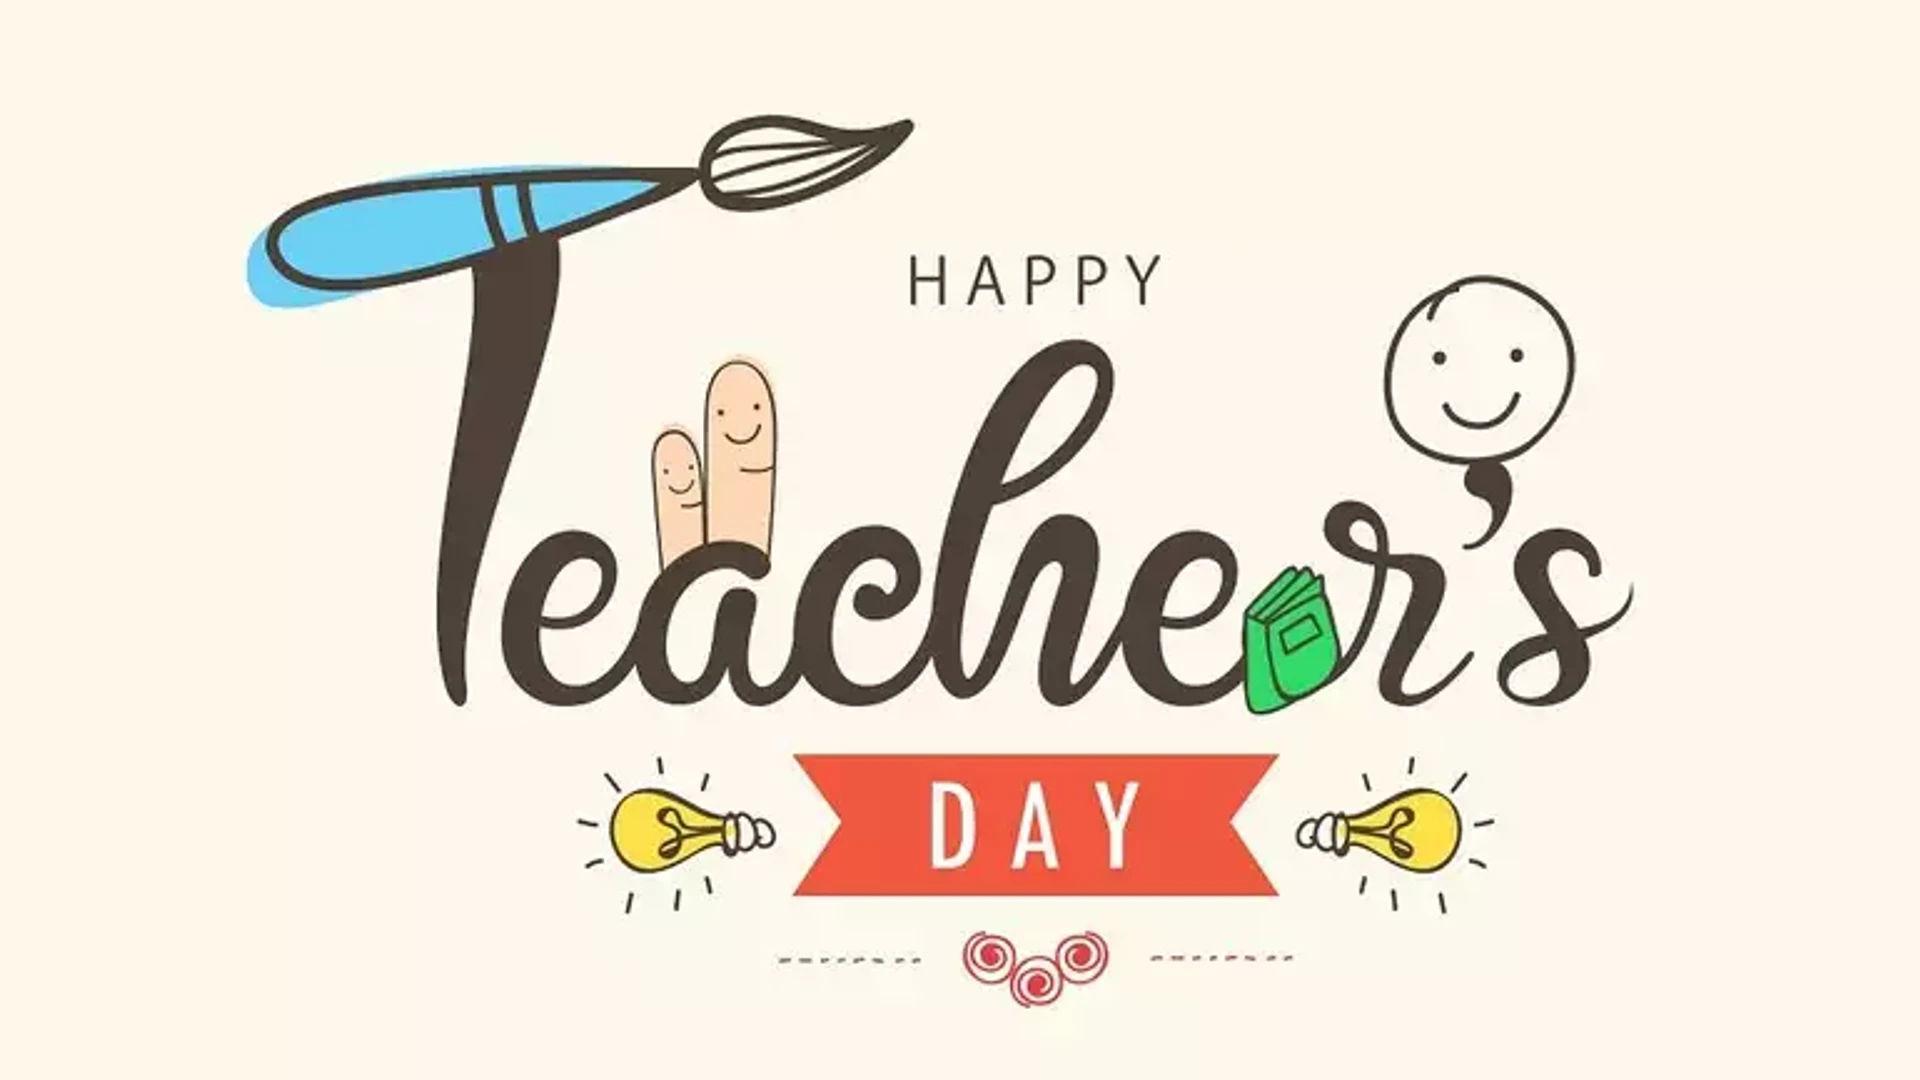 Teachers Day messages, wishes and quotes